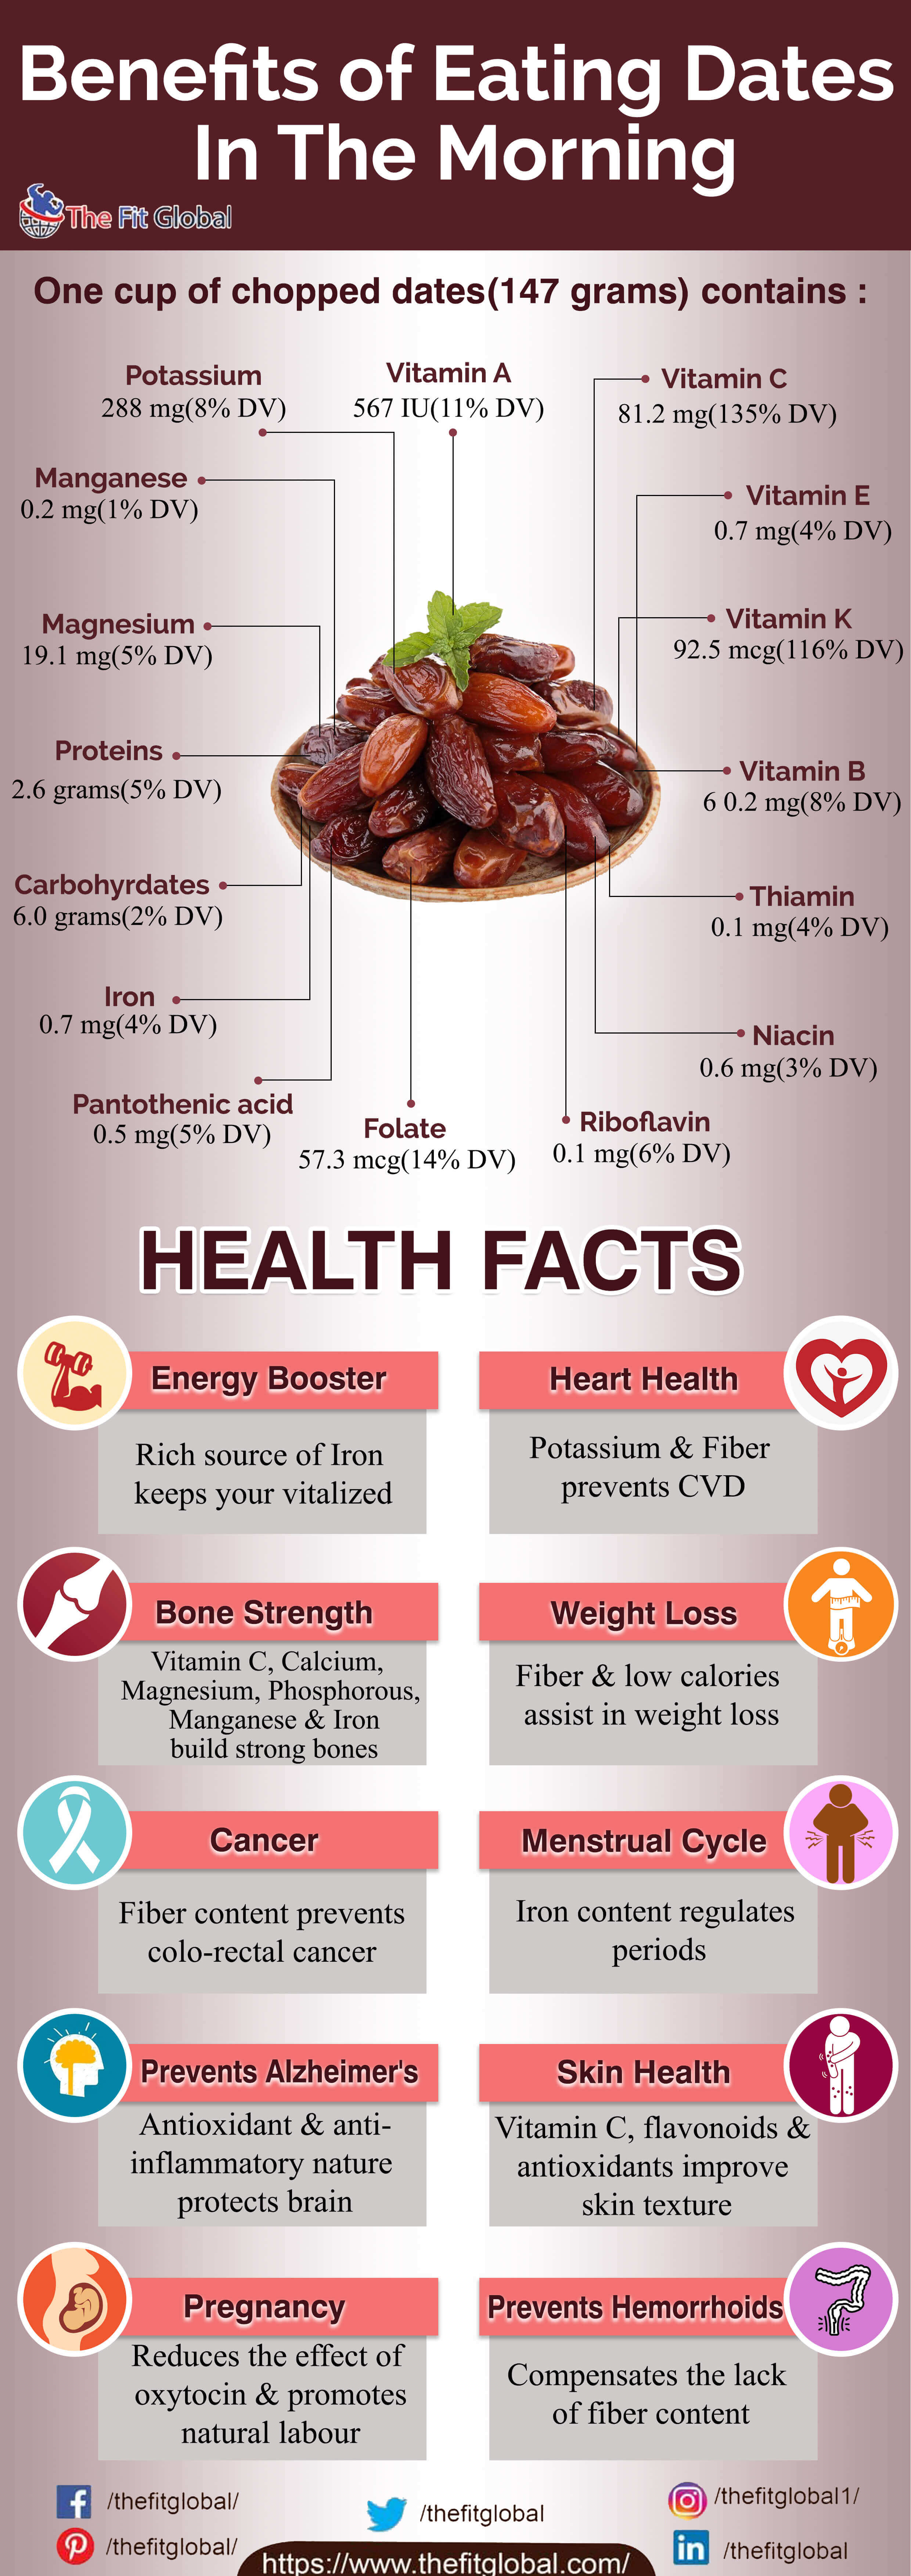 10 Benefits of eating dates in the morning